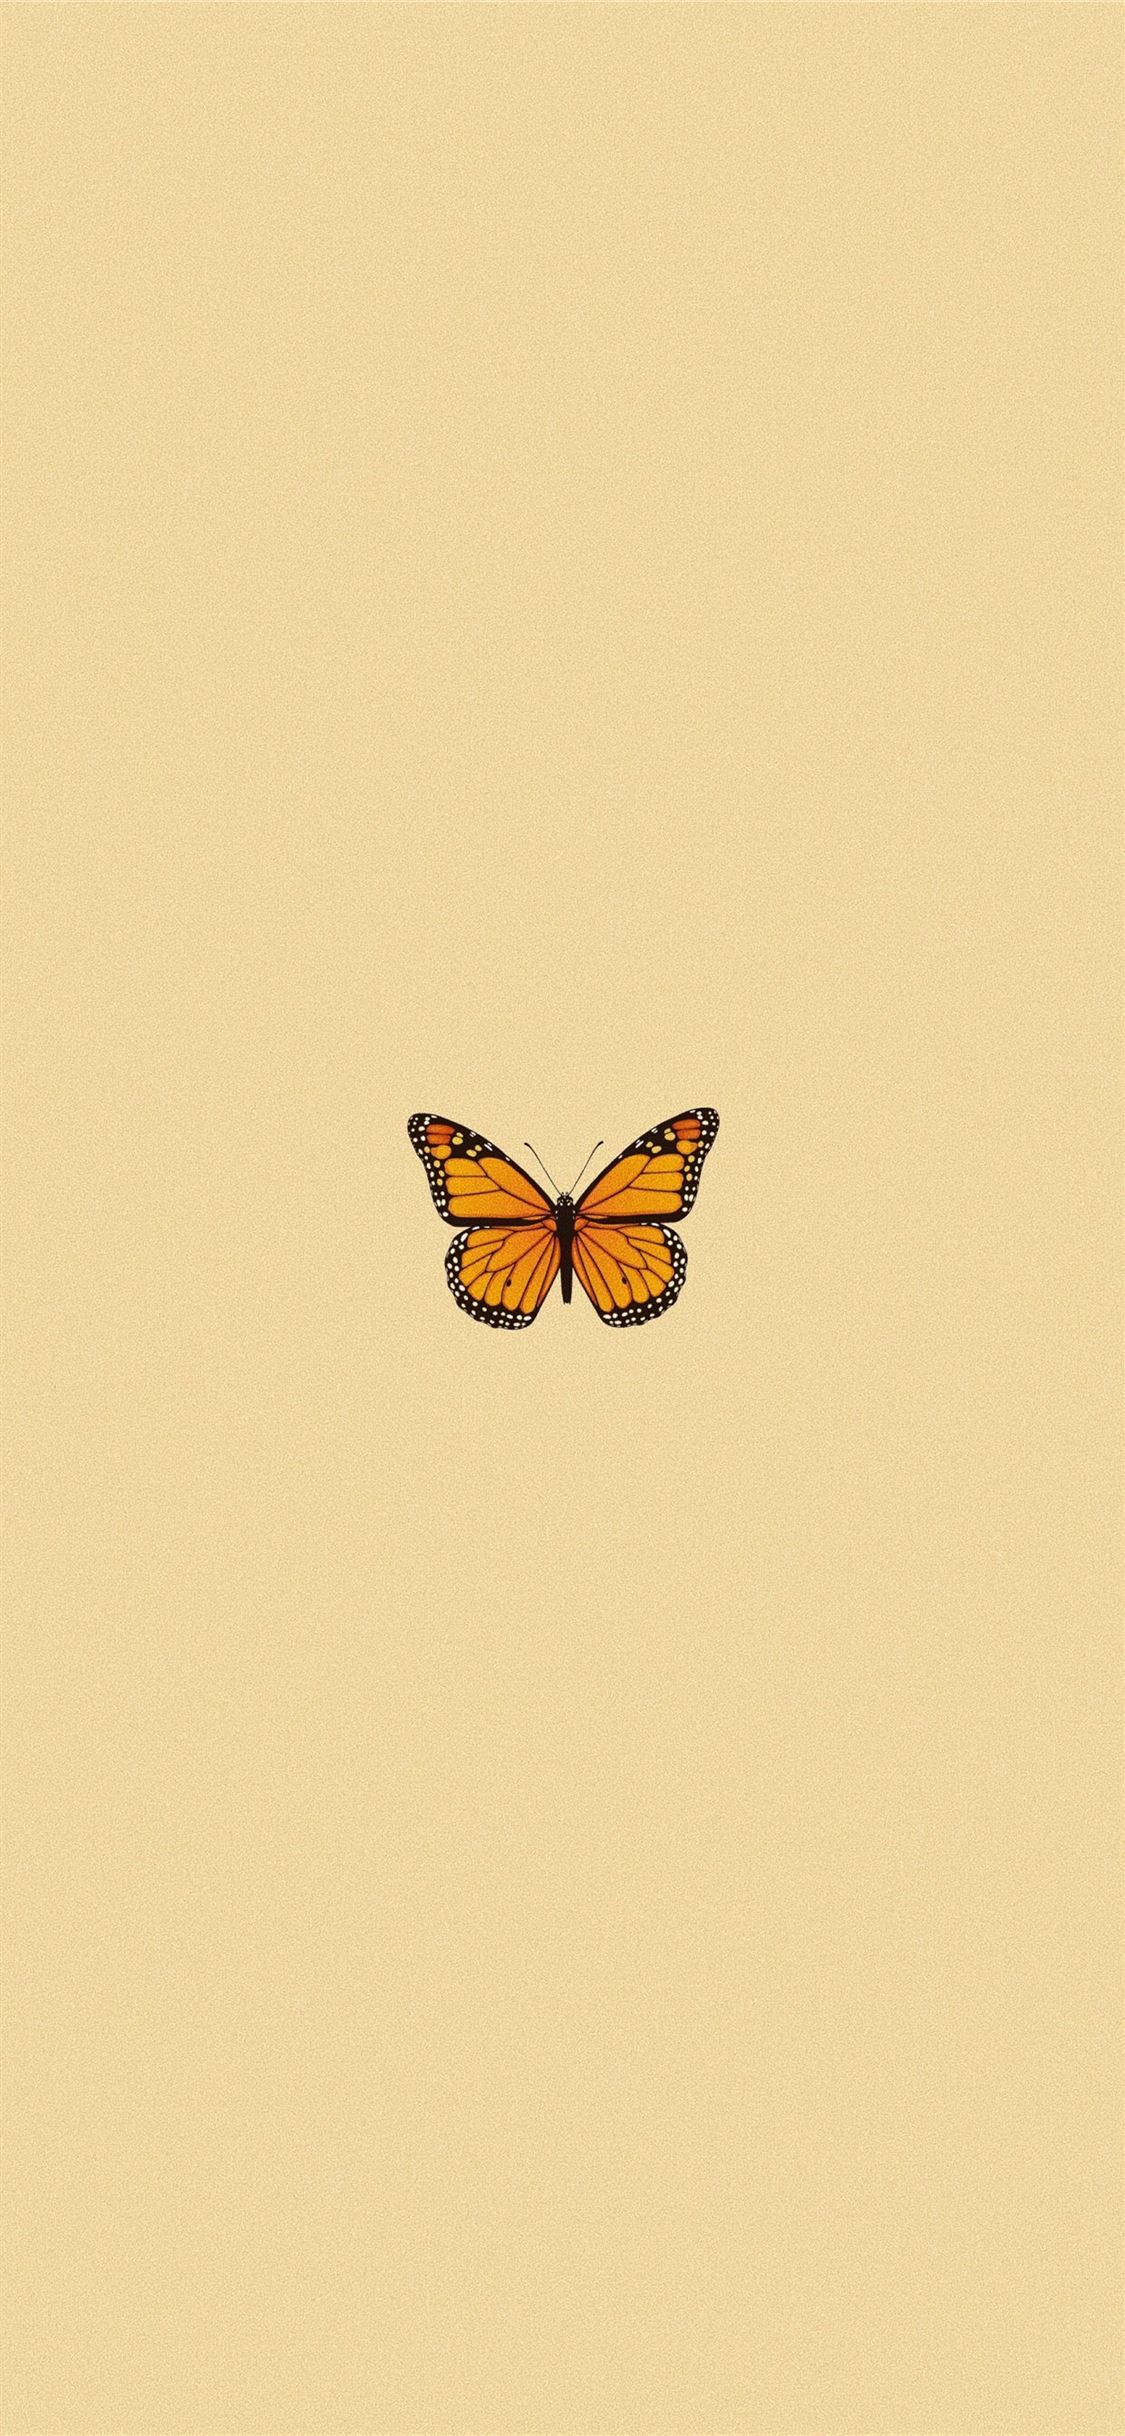 Butterfly Aesthetics Wallpapers - Wallpaper Cave